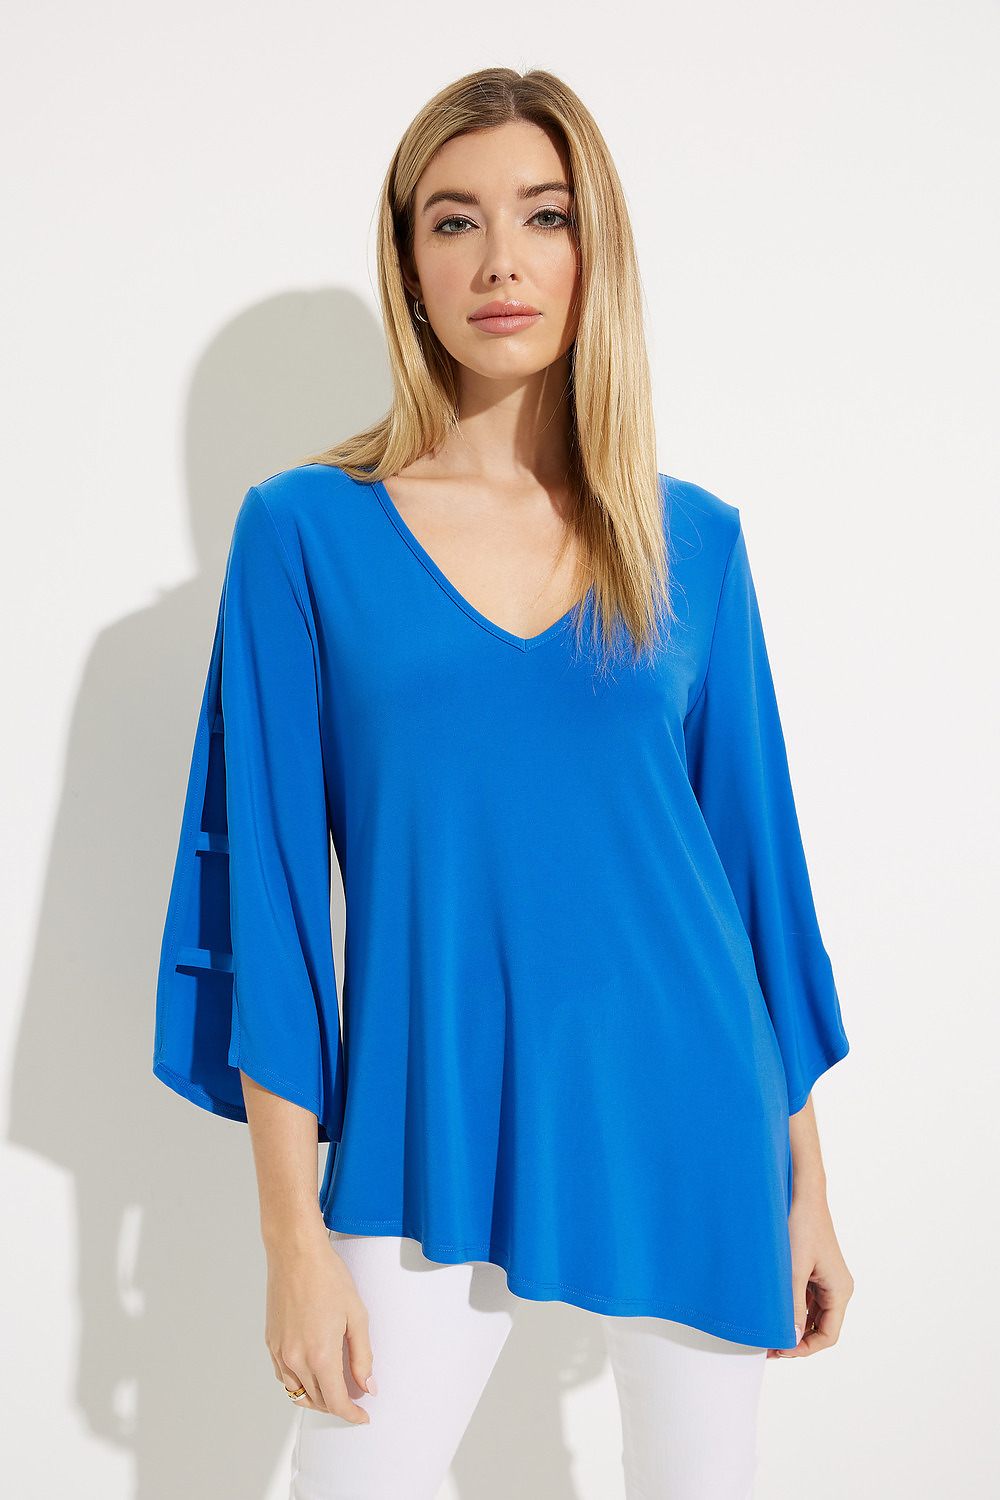 Cut-Out Sleeves Top Style 231156. Oasis